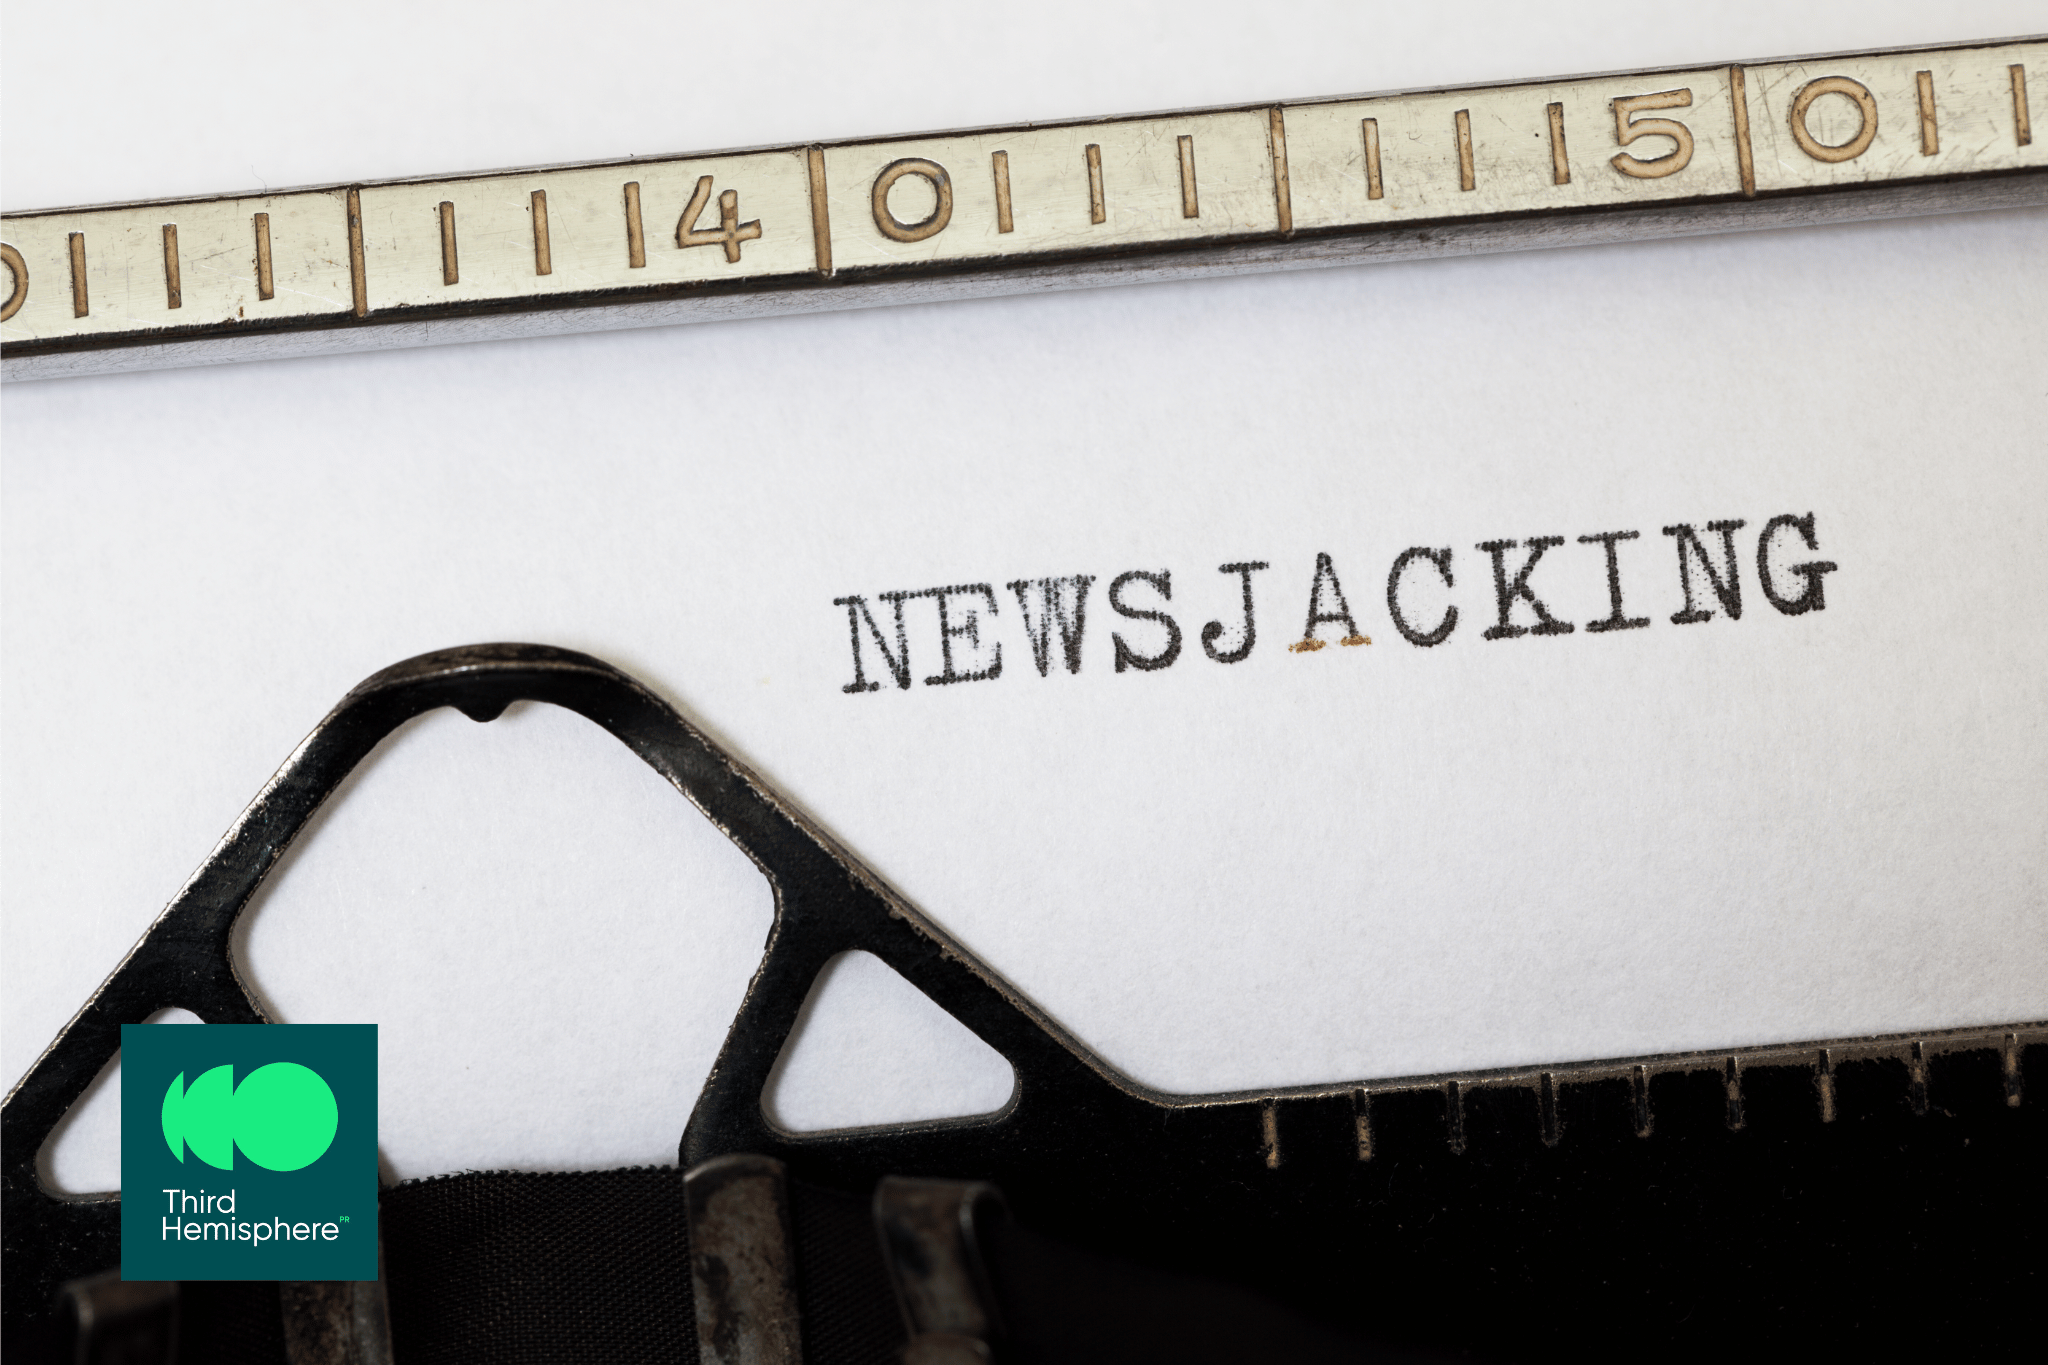 Text "newsjacking" typed on a vintage typewriter, representing the concept of integrating news stories into brand messaging.